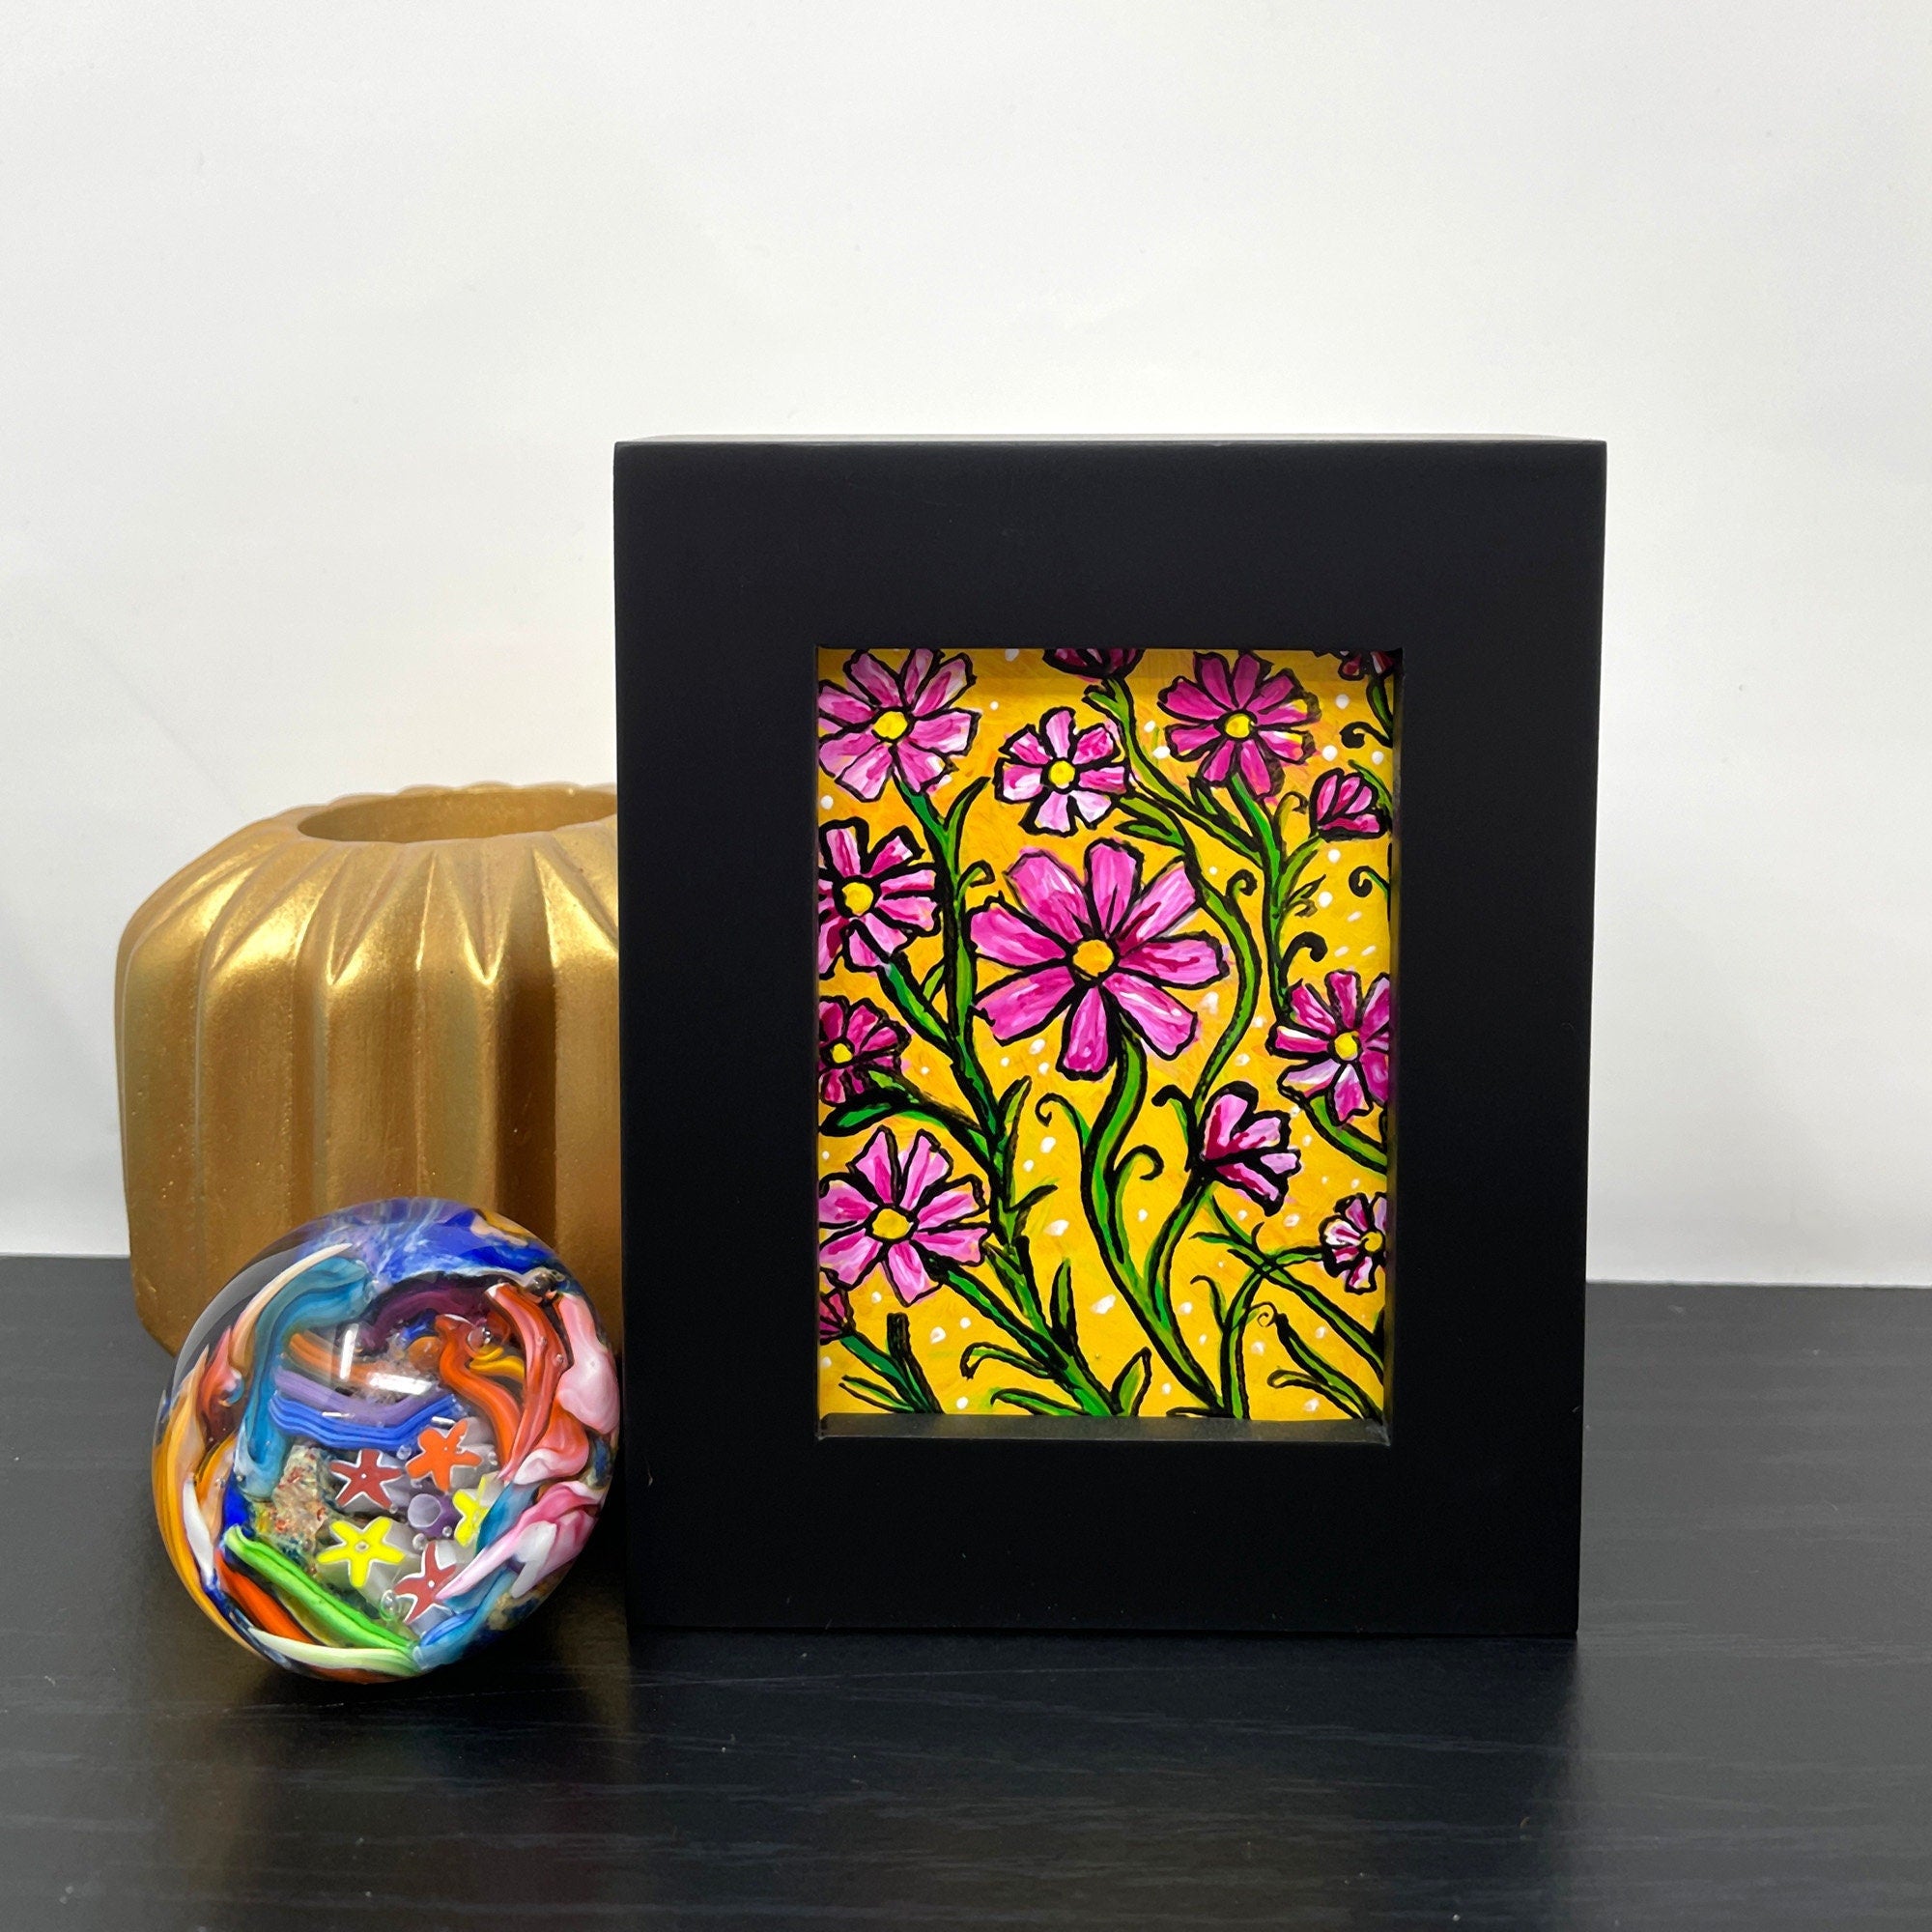 Cosmos Flower Painting - Small Floral Art in Frame - Pink Flowers On Yellow Ochre - Framed Mini Painting by Claudine Intner